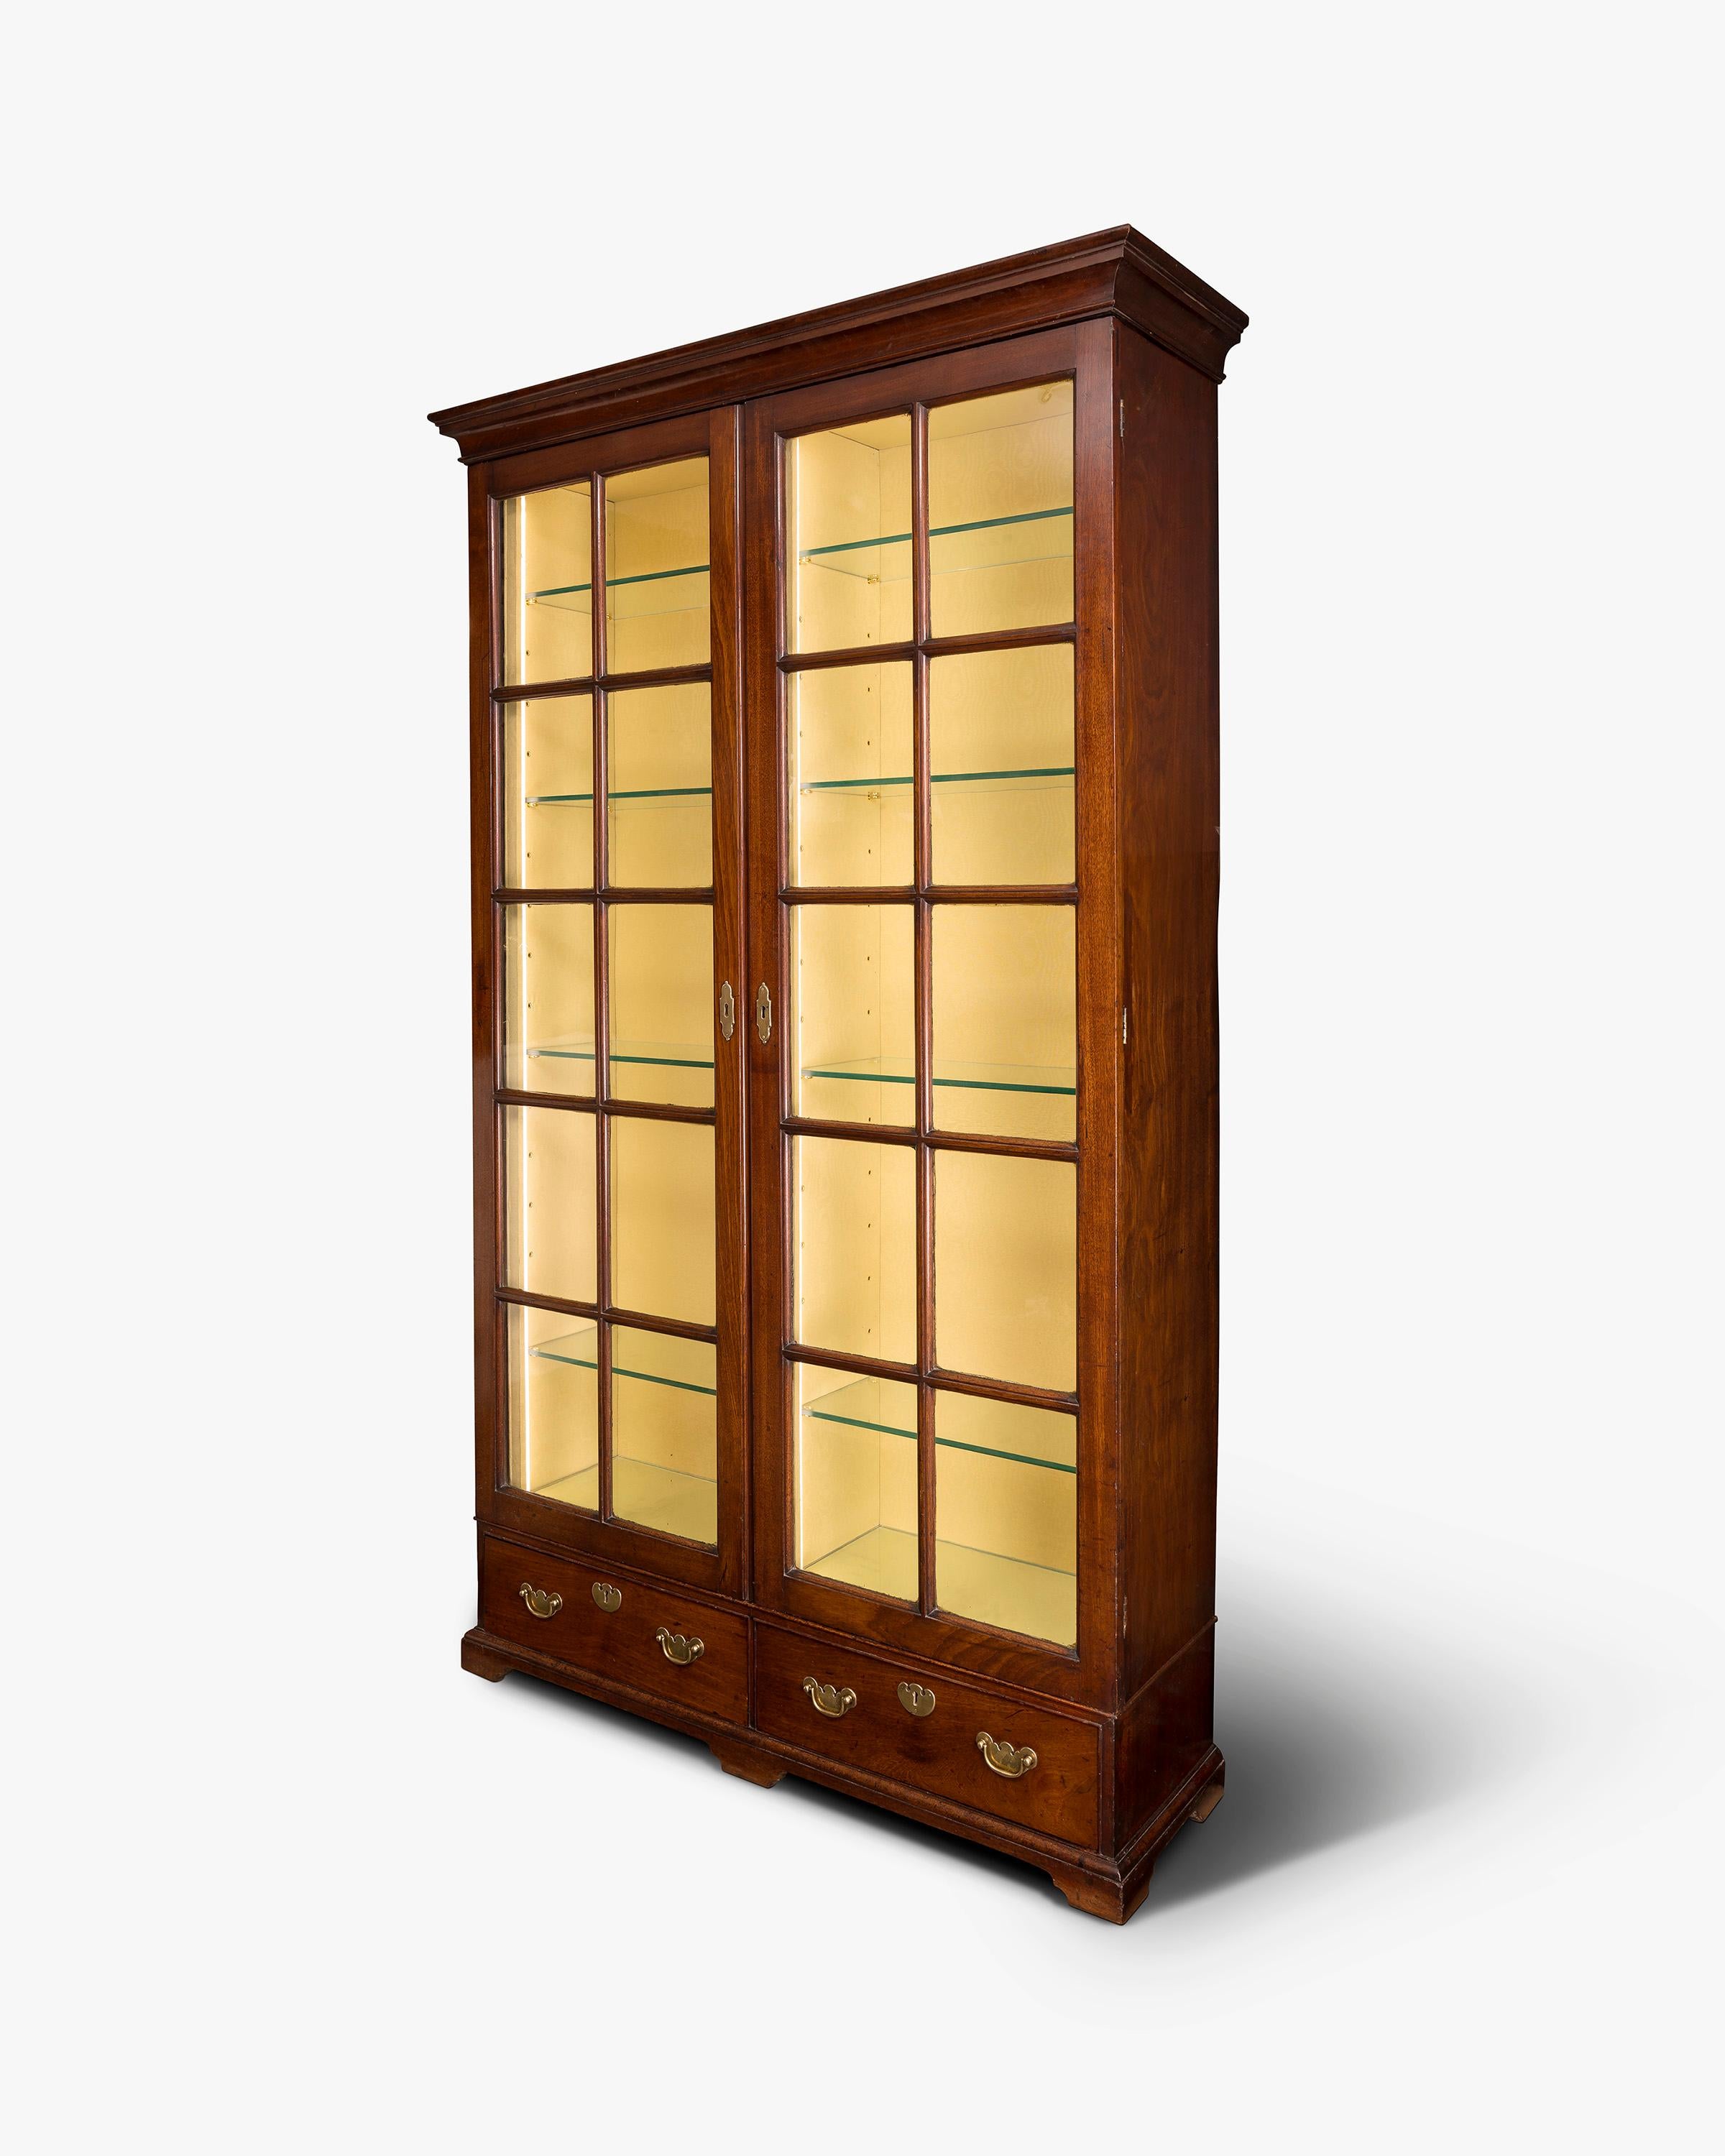 A George II period mahogany library bookcase. Two drawers in the lower section above the bracket feet. Two glazed doors with typically thick George II glazing’s bars.

This piece has been converted for the 21st century by having the interior lined